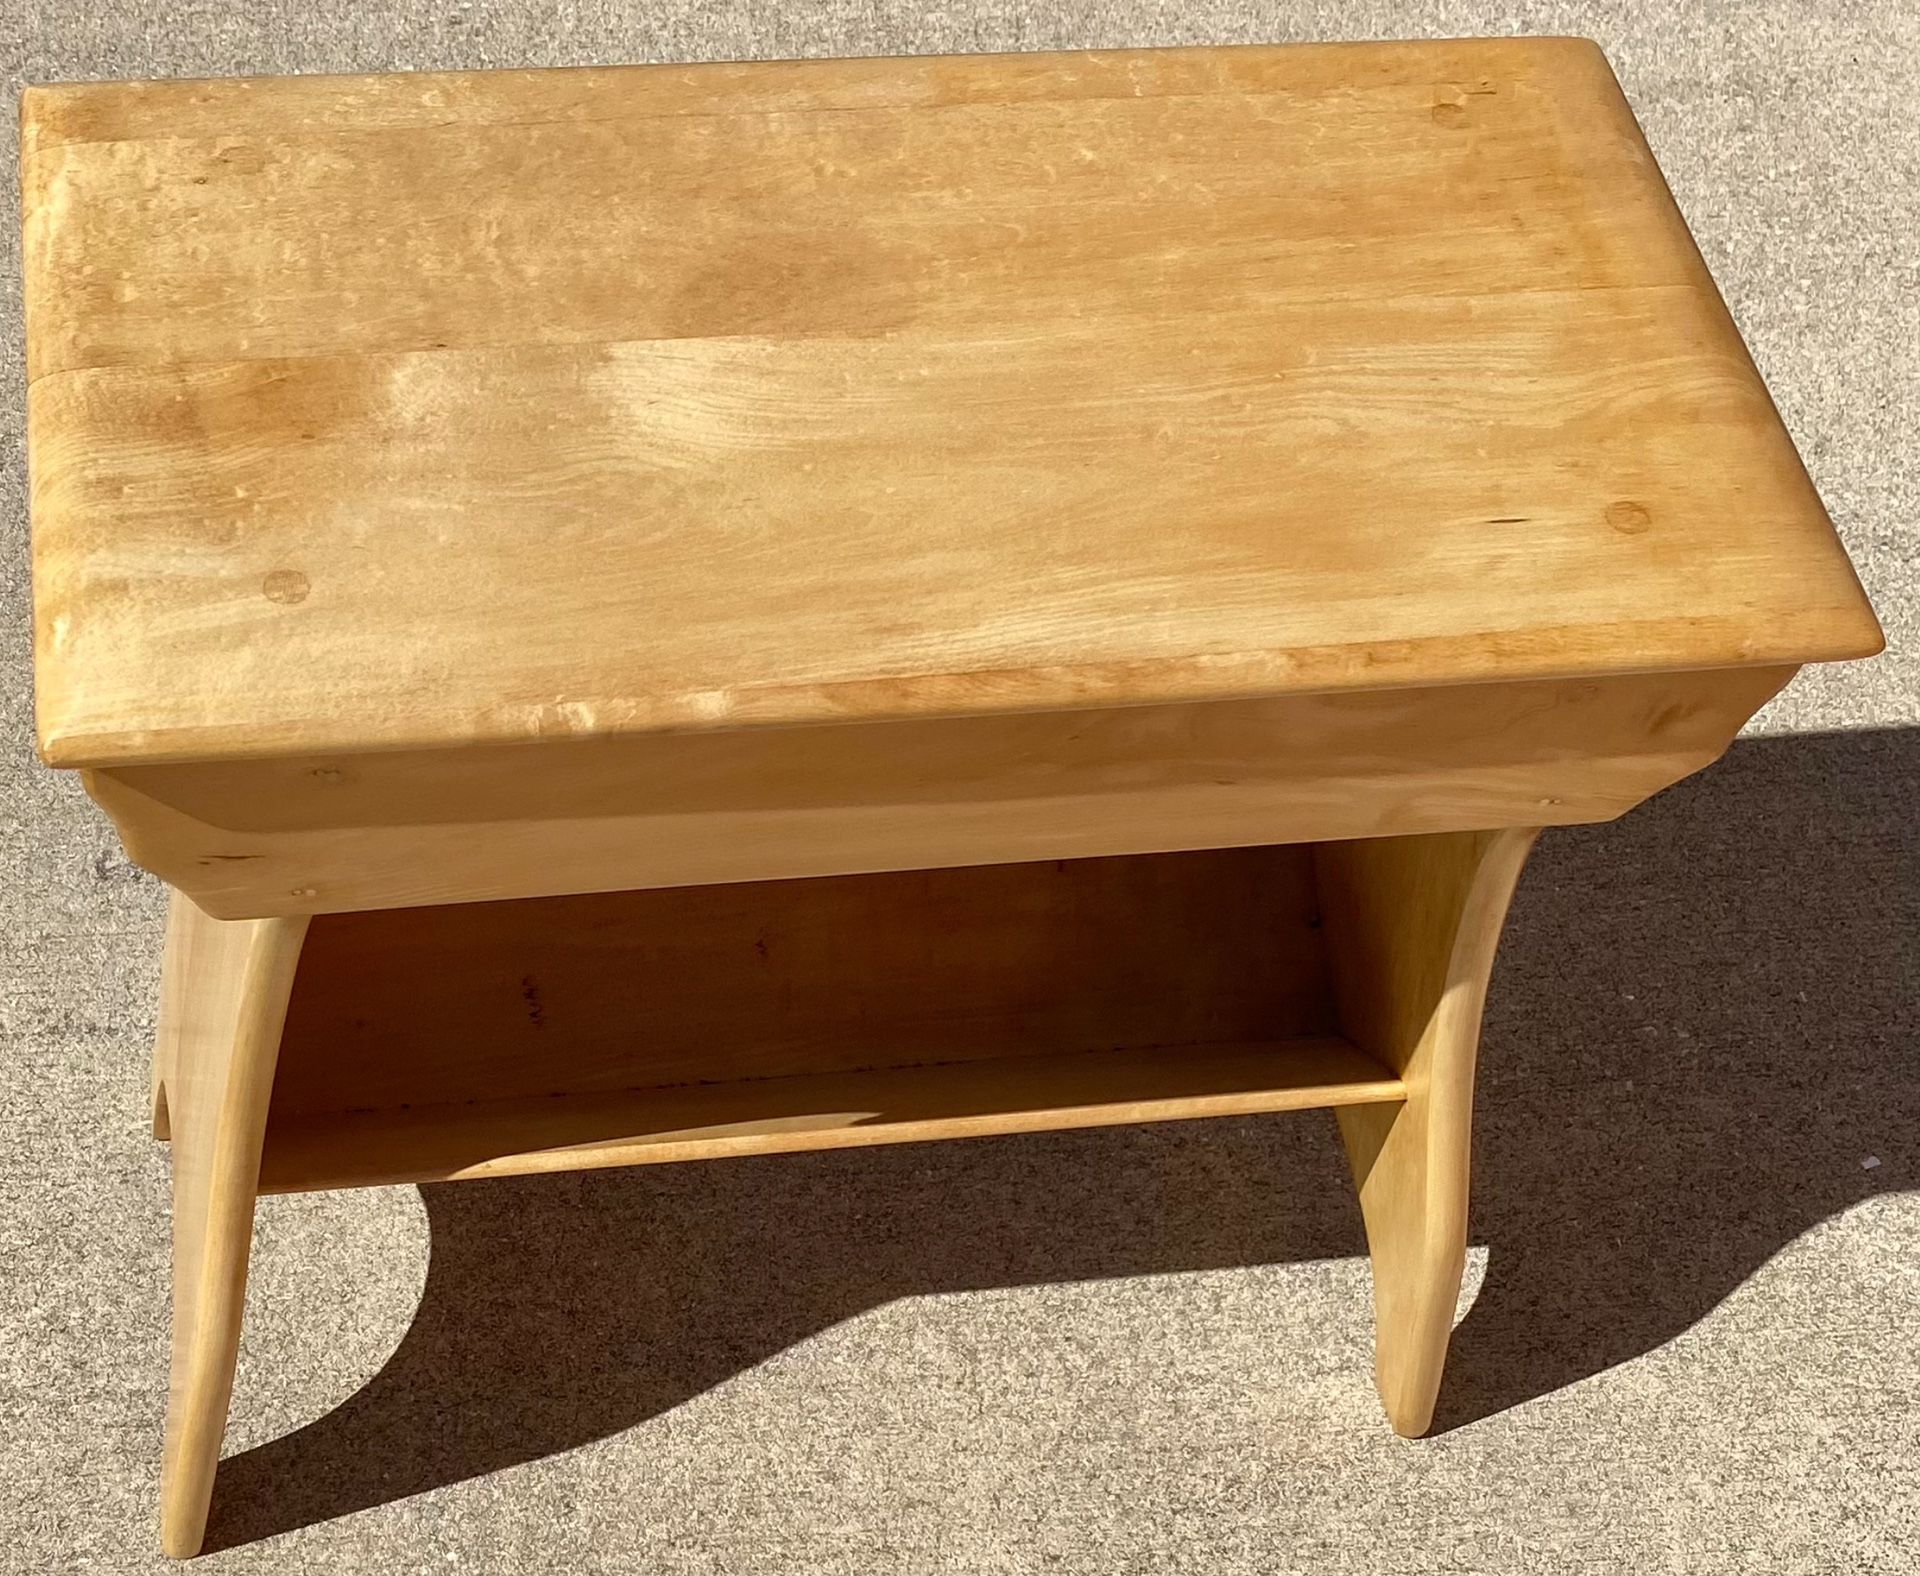 Restored Vintage Maple End/book Table